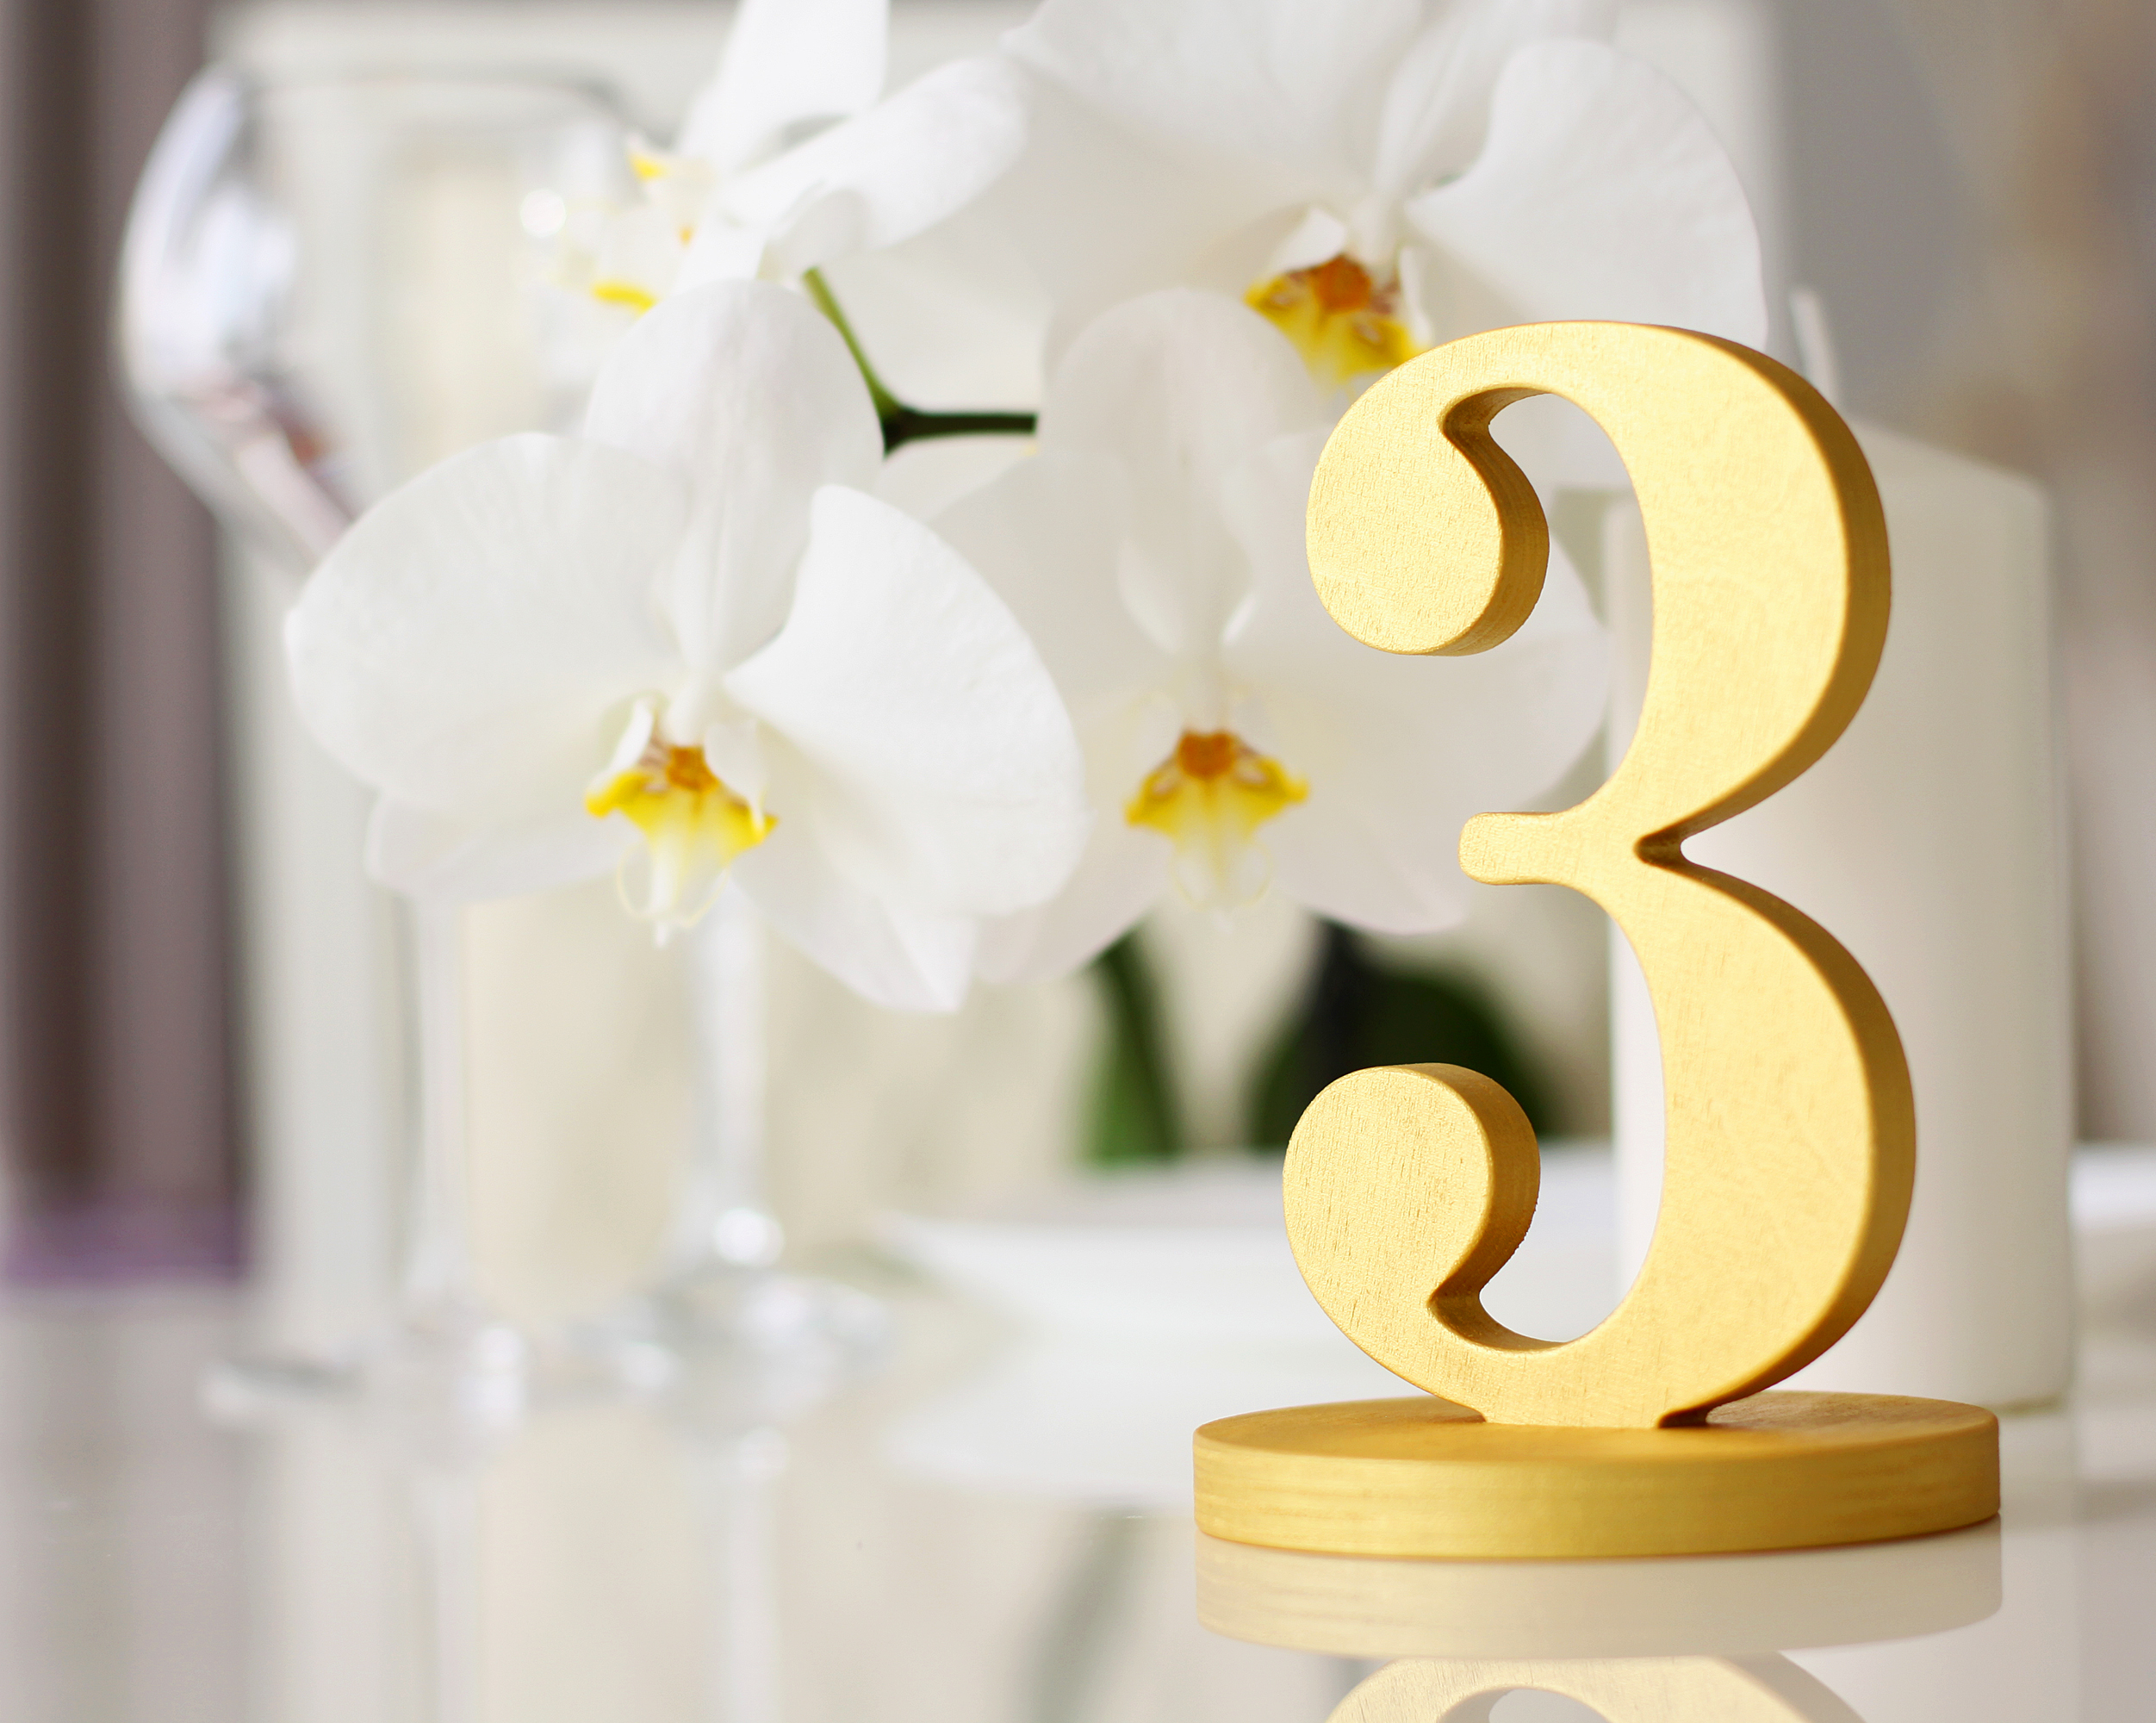 table number | table number idea | creative table number ideas | table numbers | wedding decor | reception decor | decor | table decor | wedding table decor 